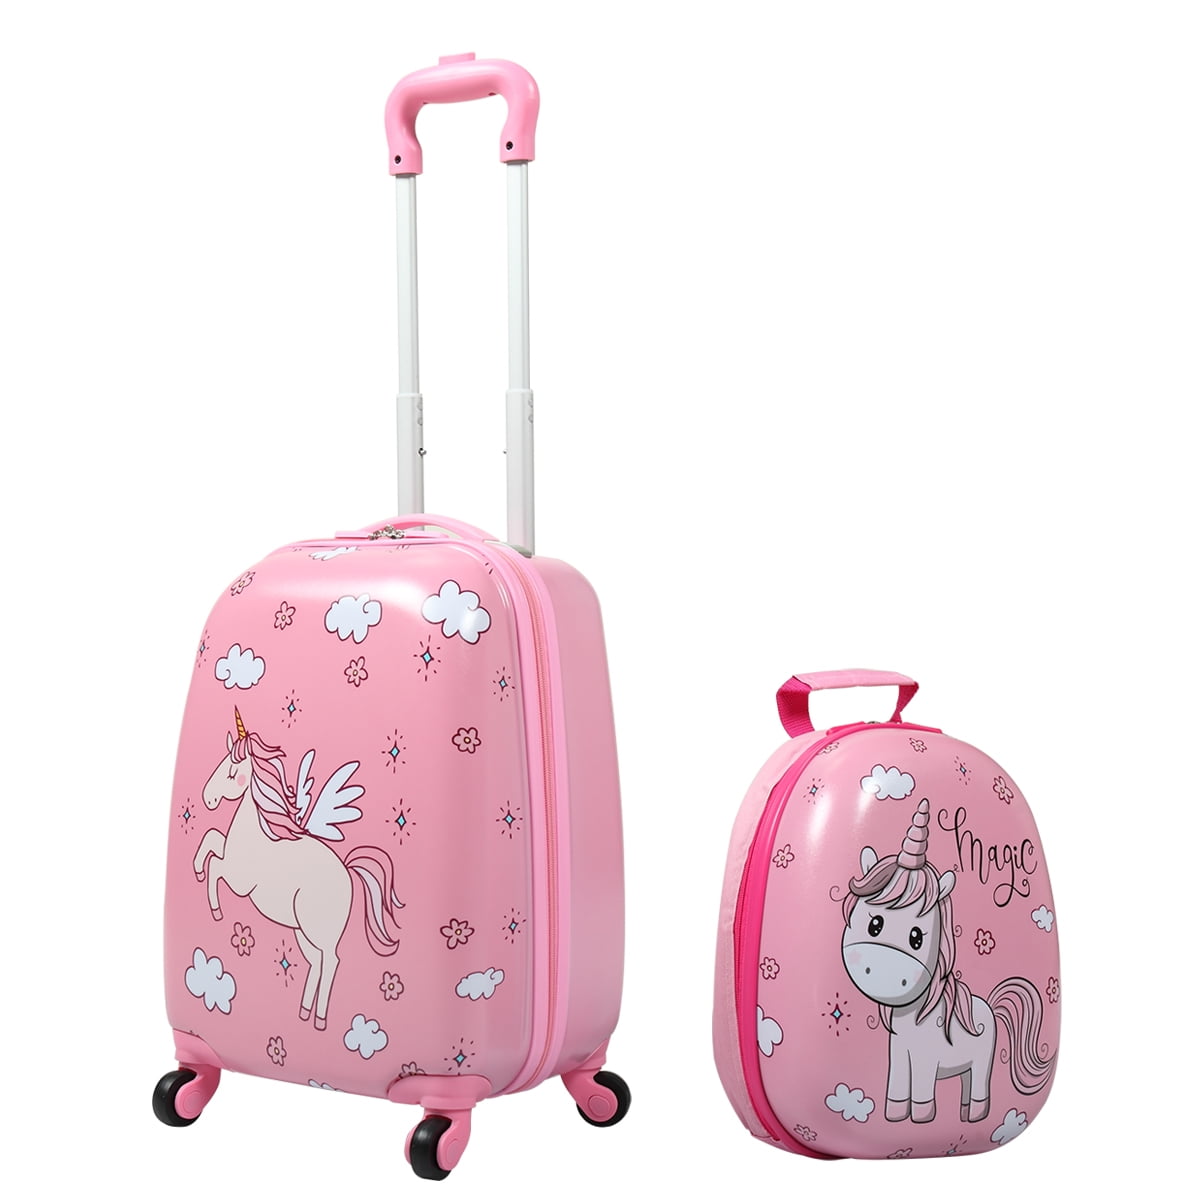 baby trolly bag for travel